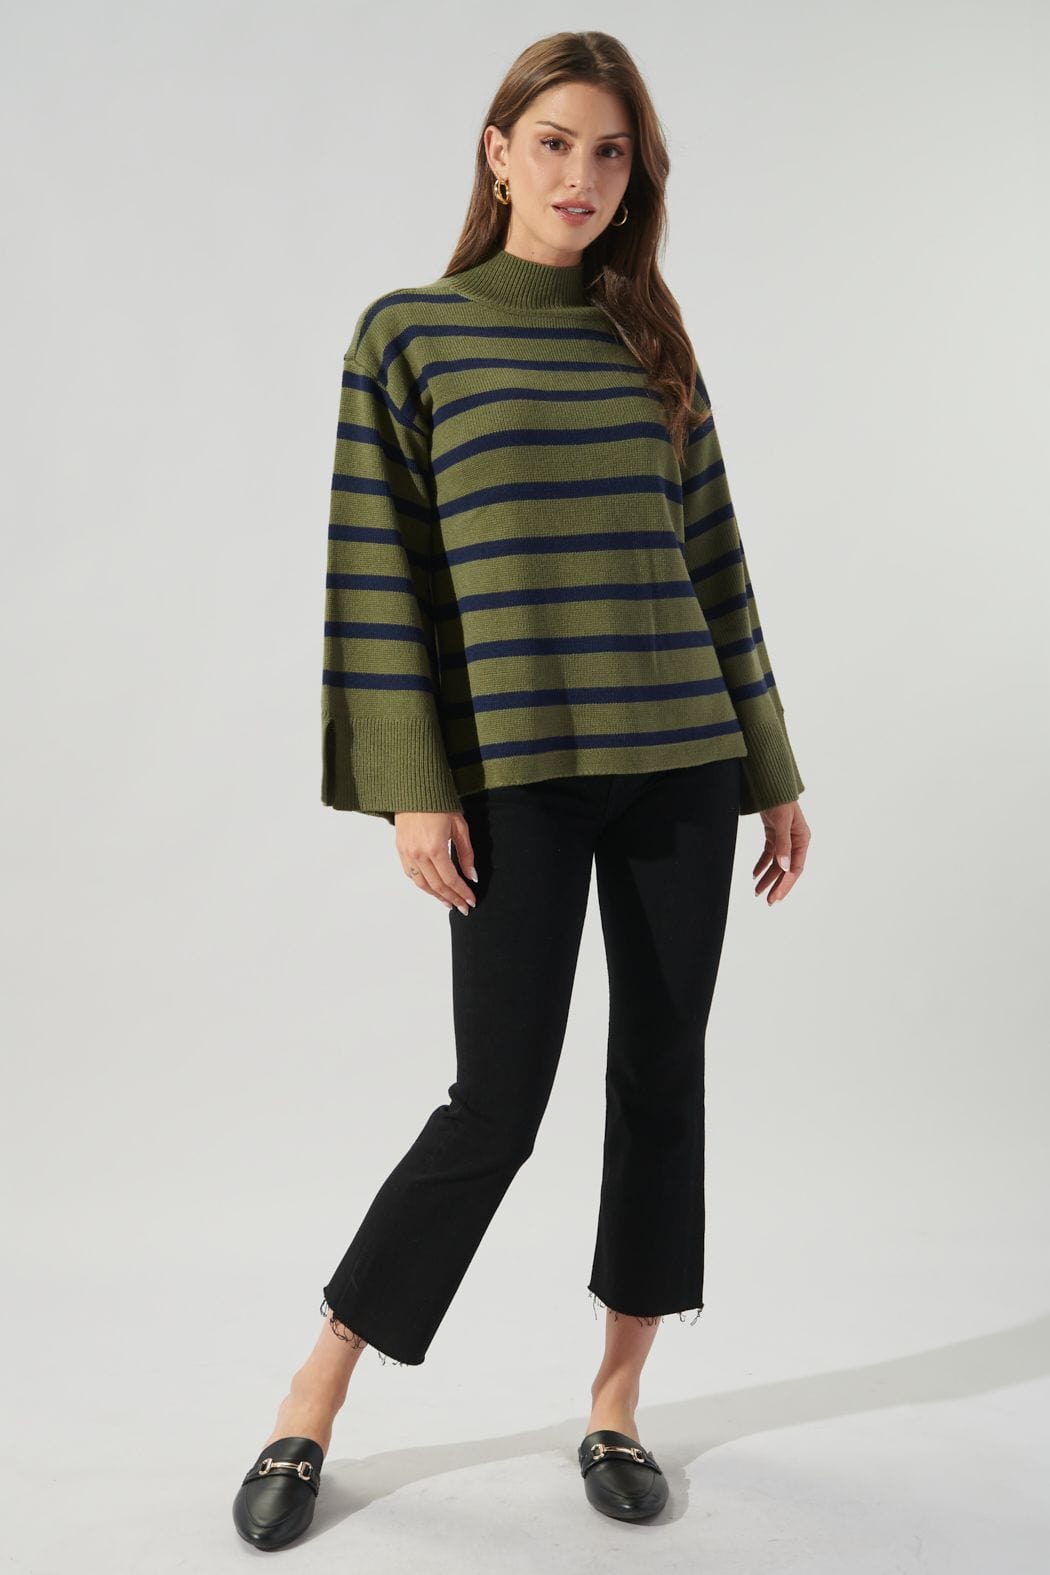 Slater Striped Mock Neck Wide Sleeve Sweater in Olive - Shirts &amp; Tops - Blooming Daily